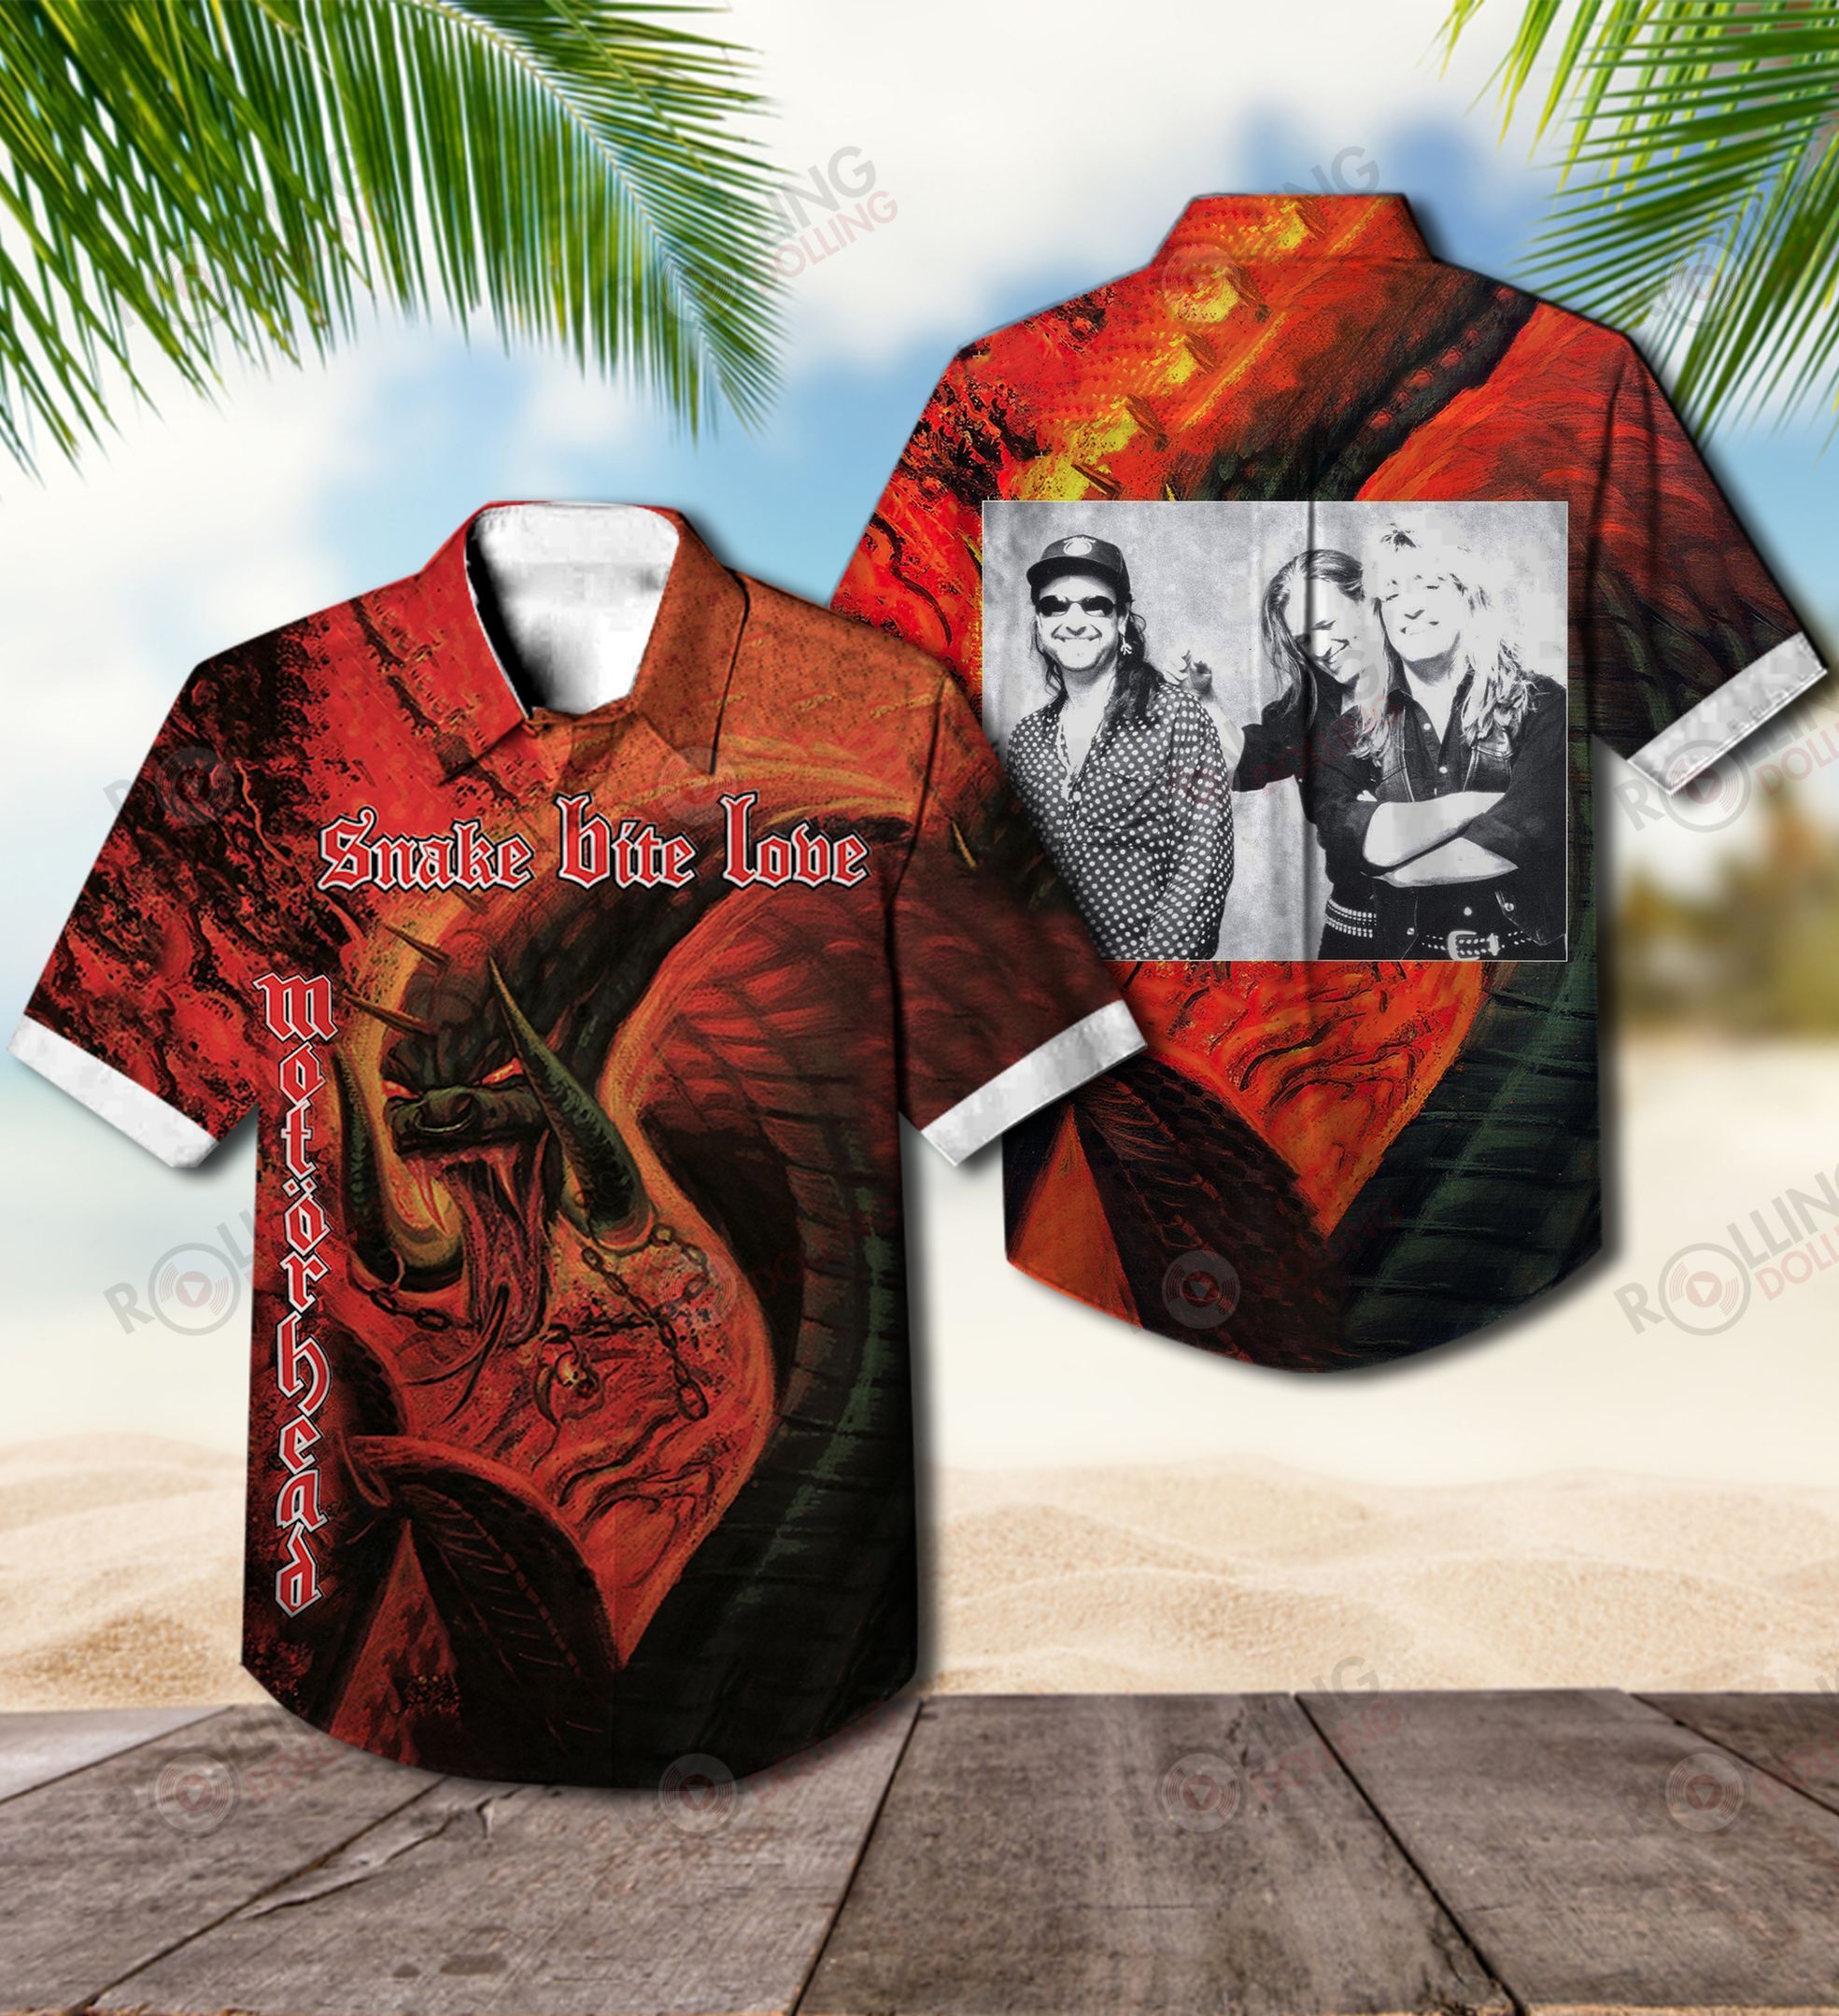 Check out these top 100+ Hawaiian shirt so cool for rock fans 371